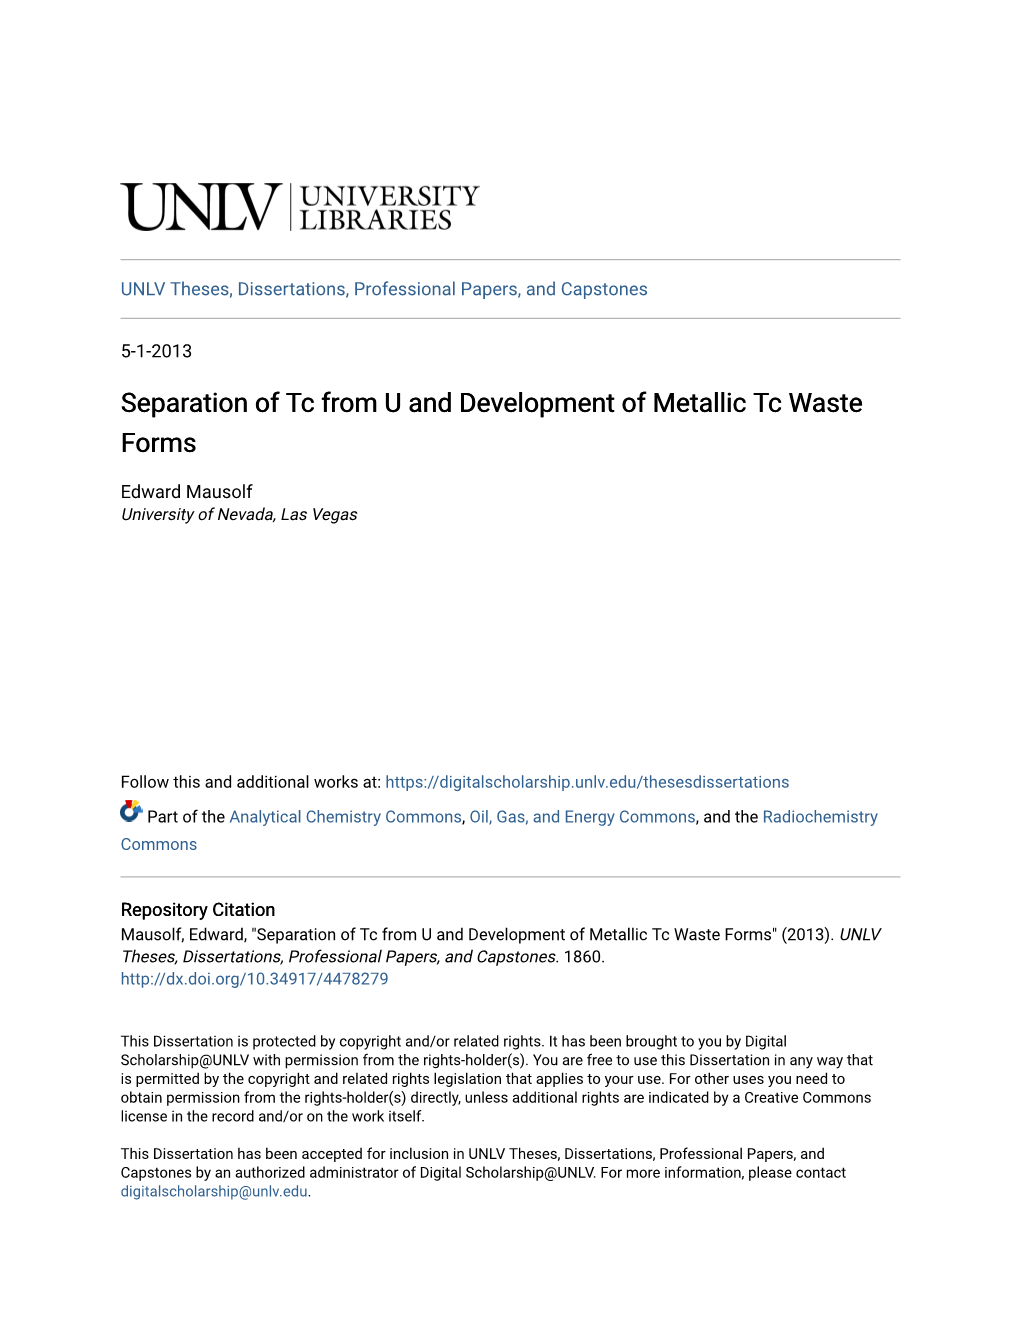 Separation of Tc from U and Development of Metallic Tc Waste Forms